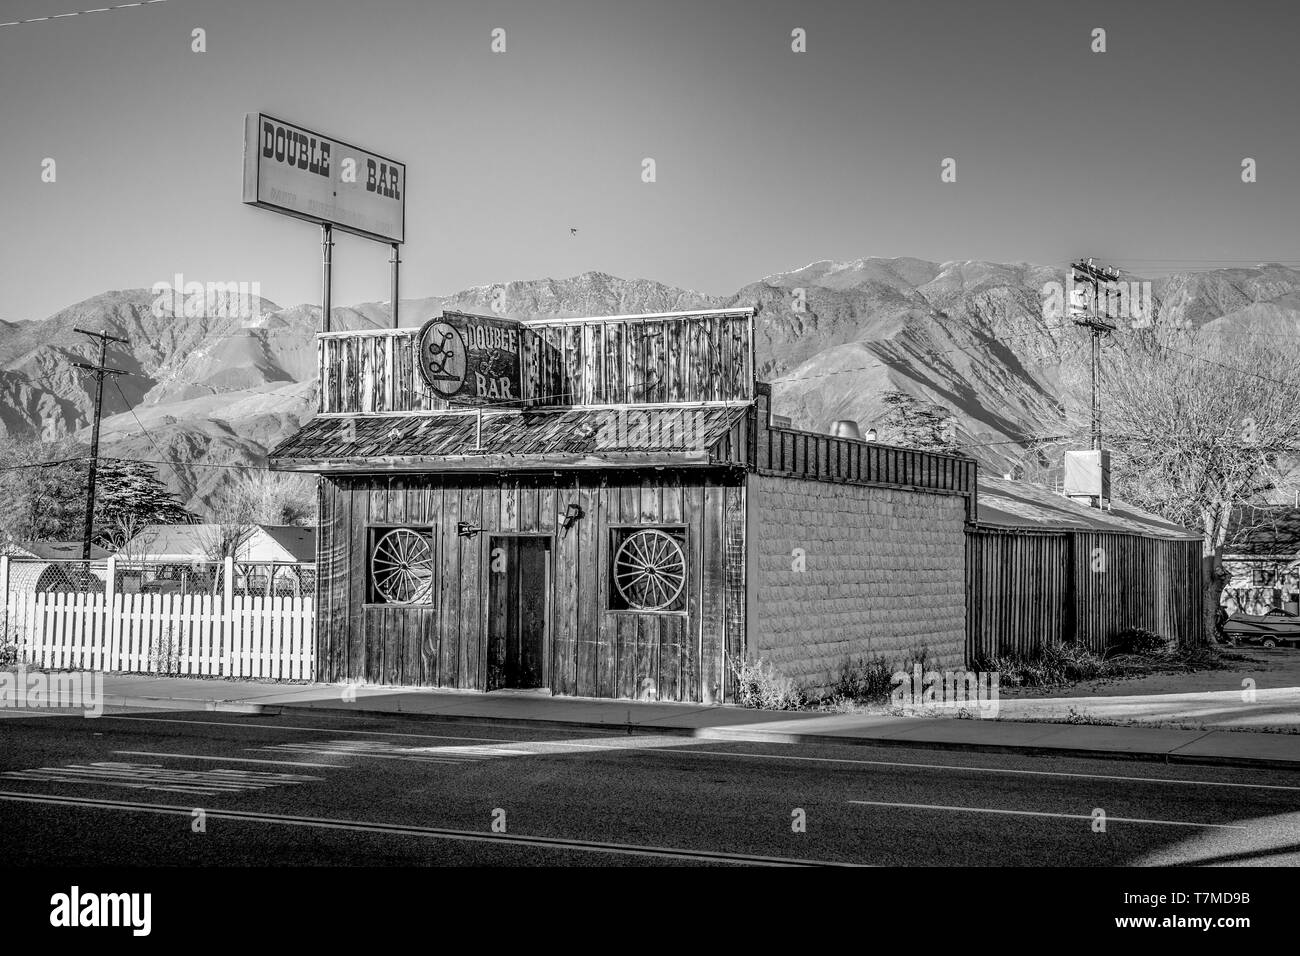 Drug store in the historic village of Lone Pine - LONE PINE CA, UNITED STATES OF AMERICA - MARCH 29, 2019 Stock Photo